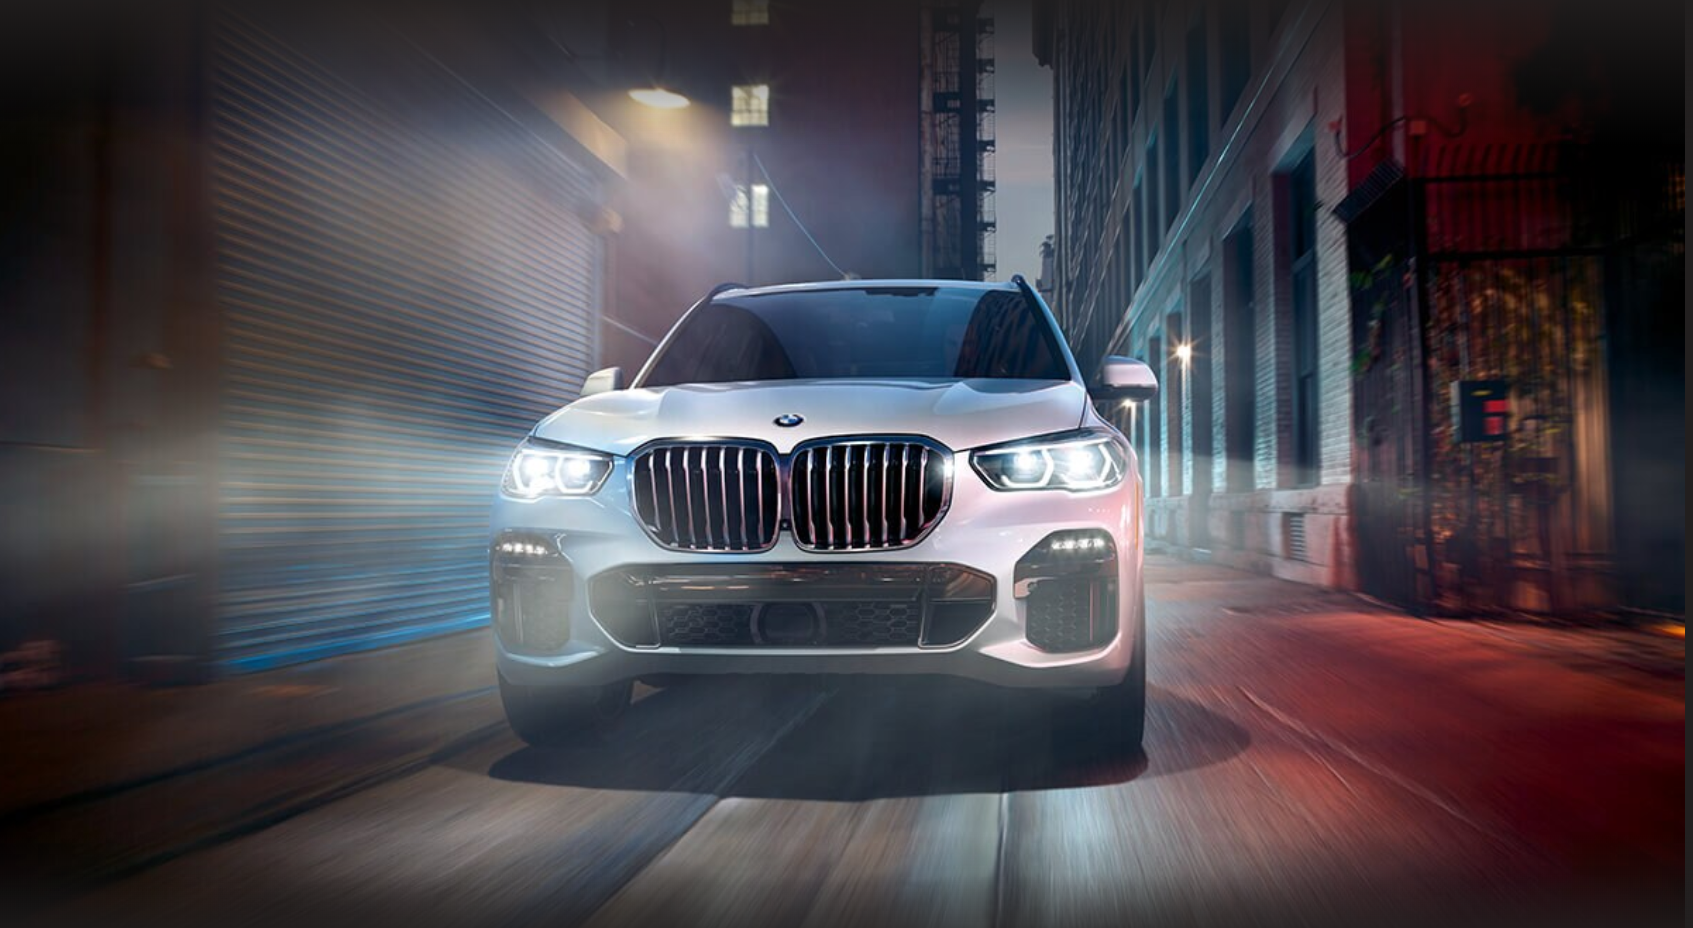 A Look at the Improvements in the 2019 BMW X5